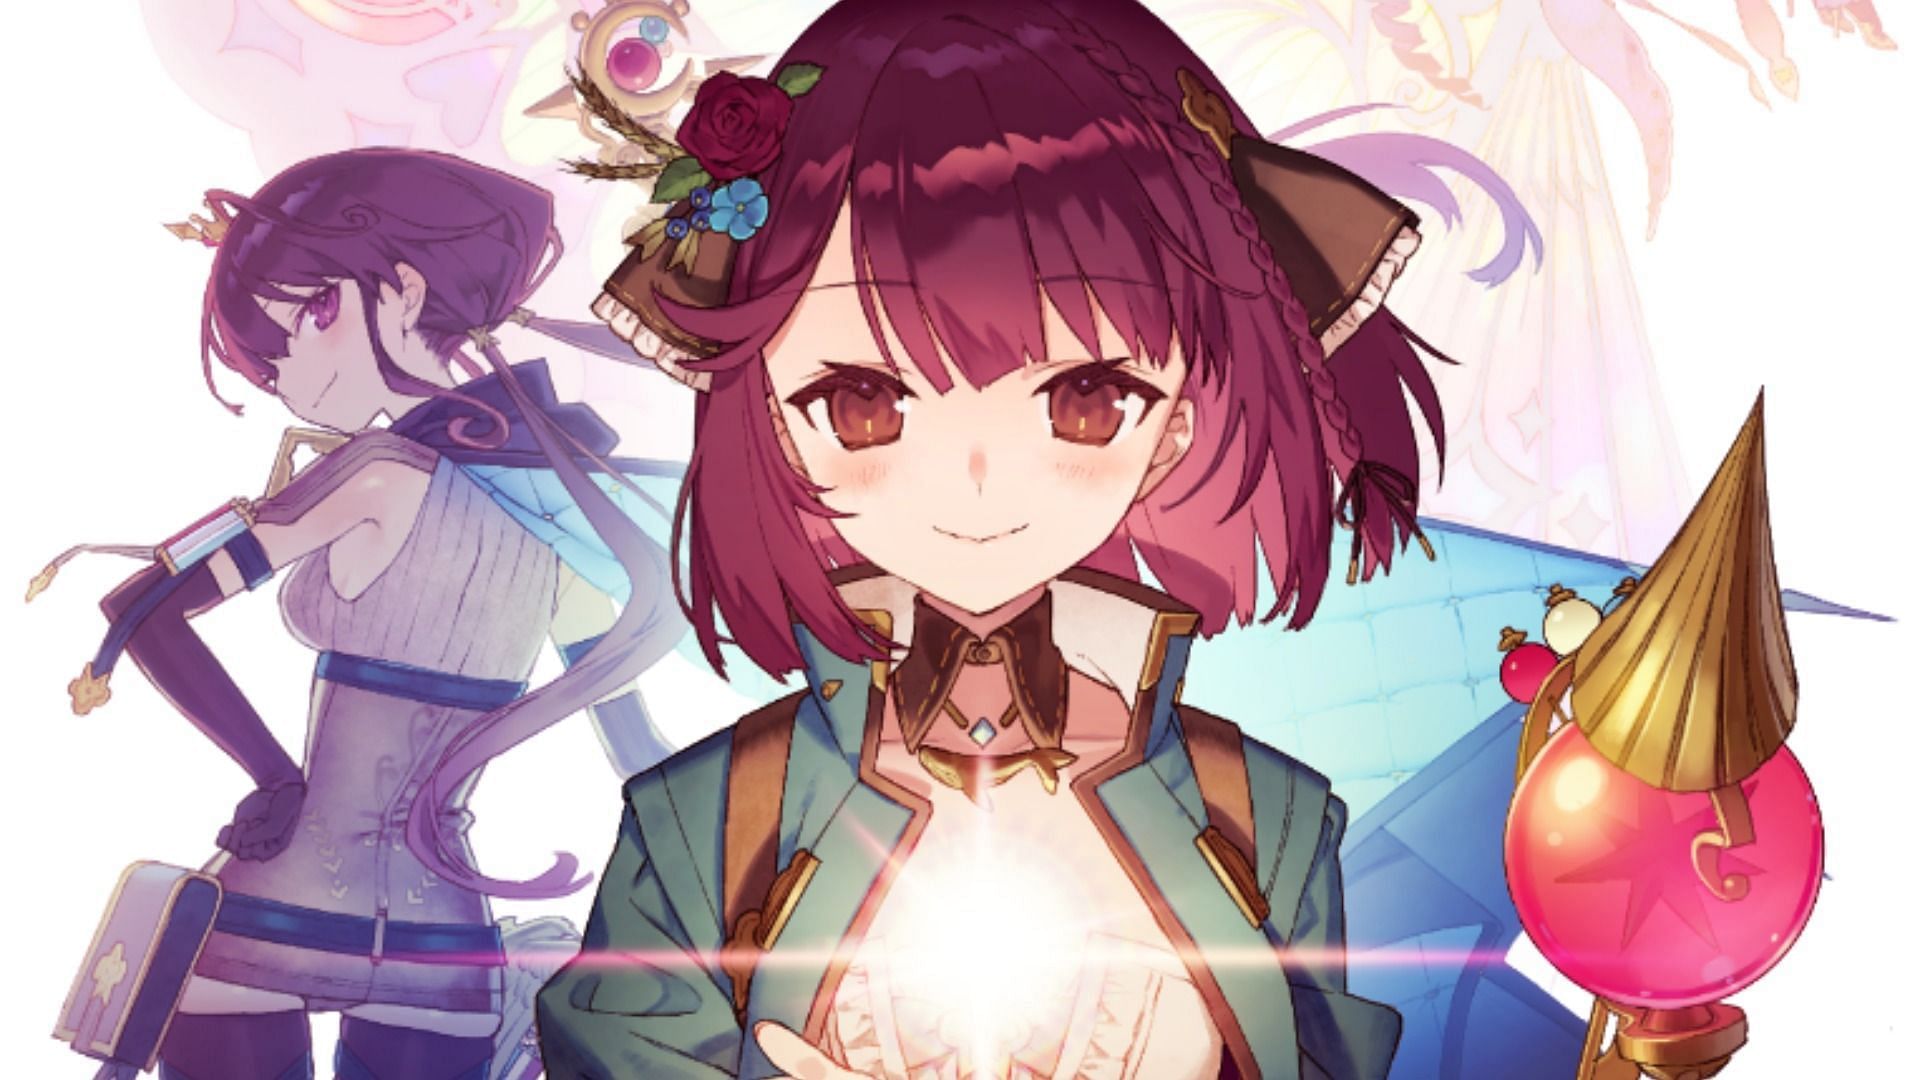 Atelier Sophie 2: The Alchemist of the Mysterious Dream review (Image via Koei Tecmo)